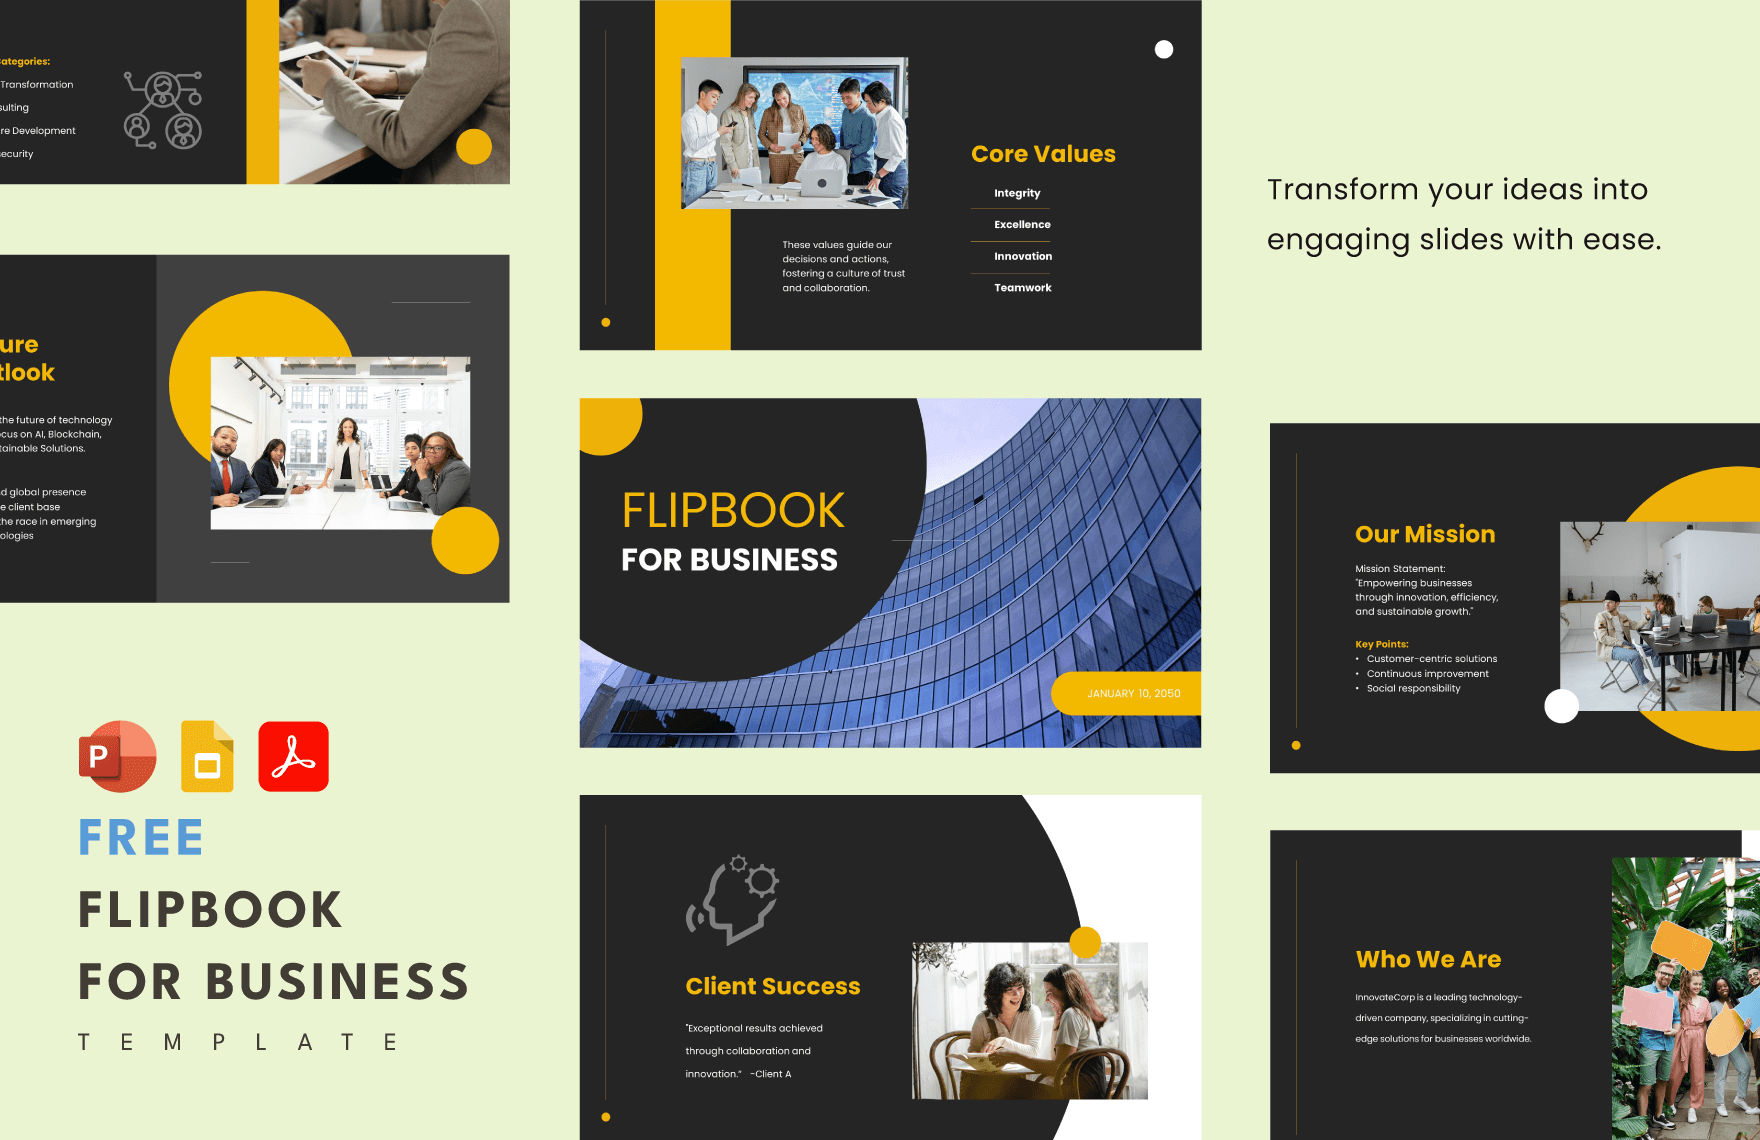 Free Flipbook for Business Template in PDF, PowerPoint, Google Slides